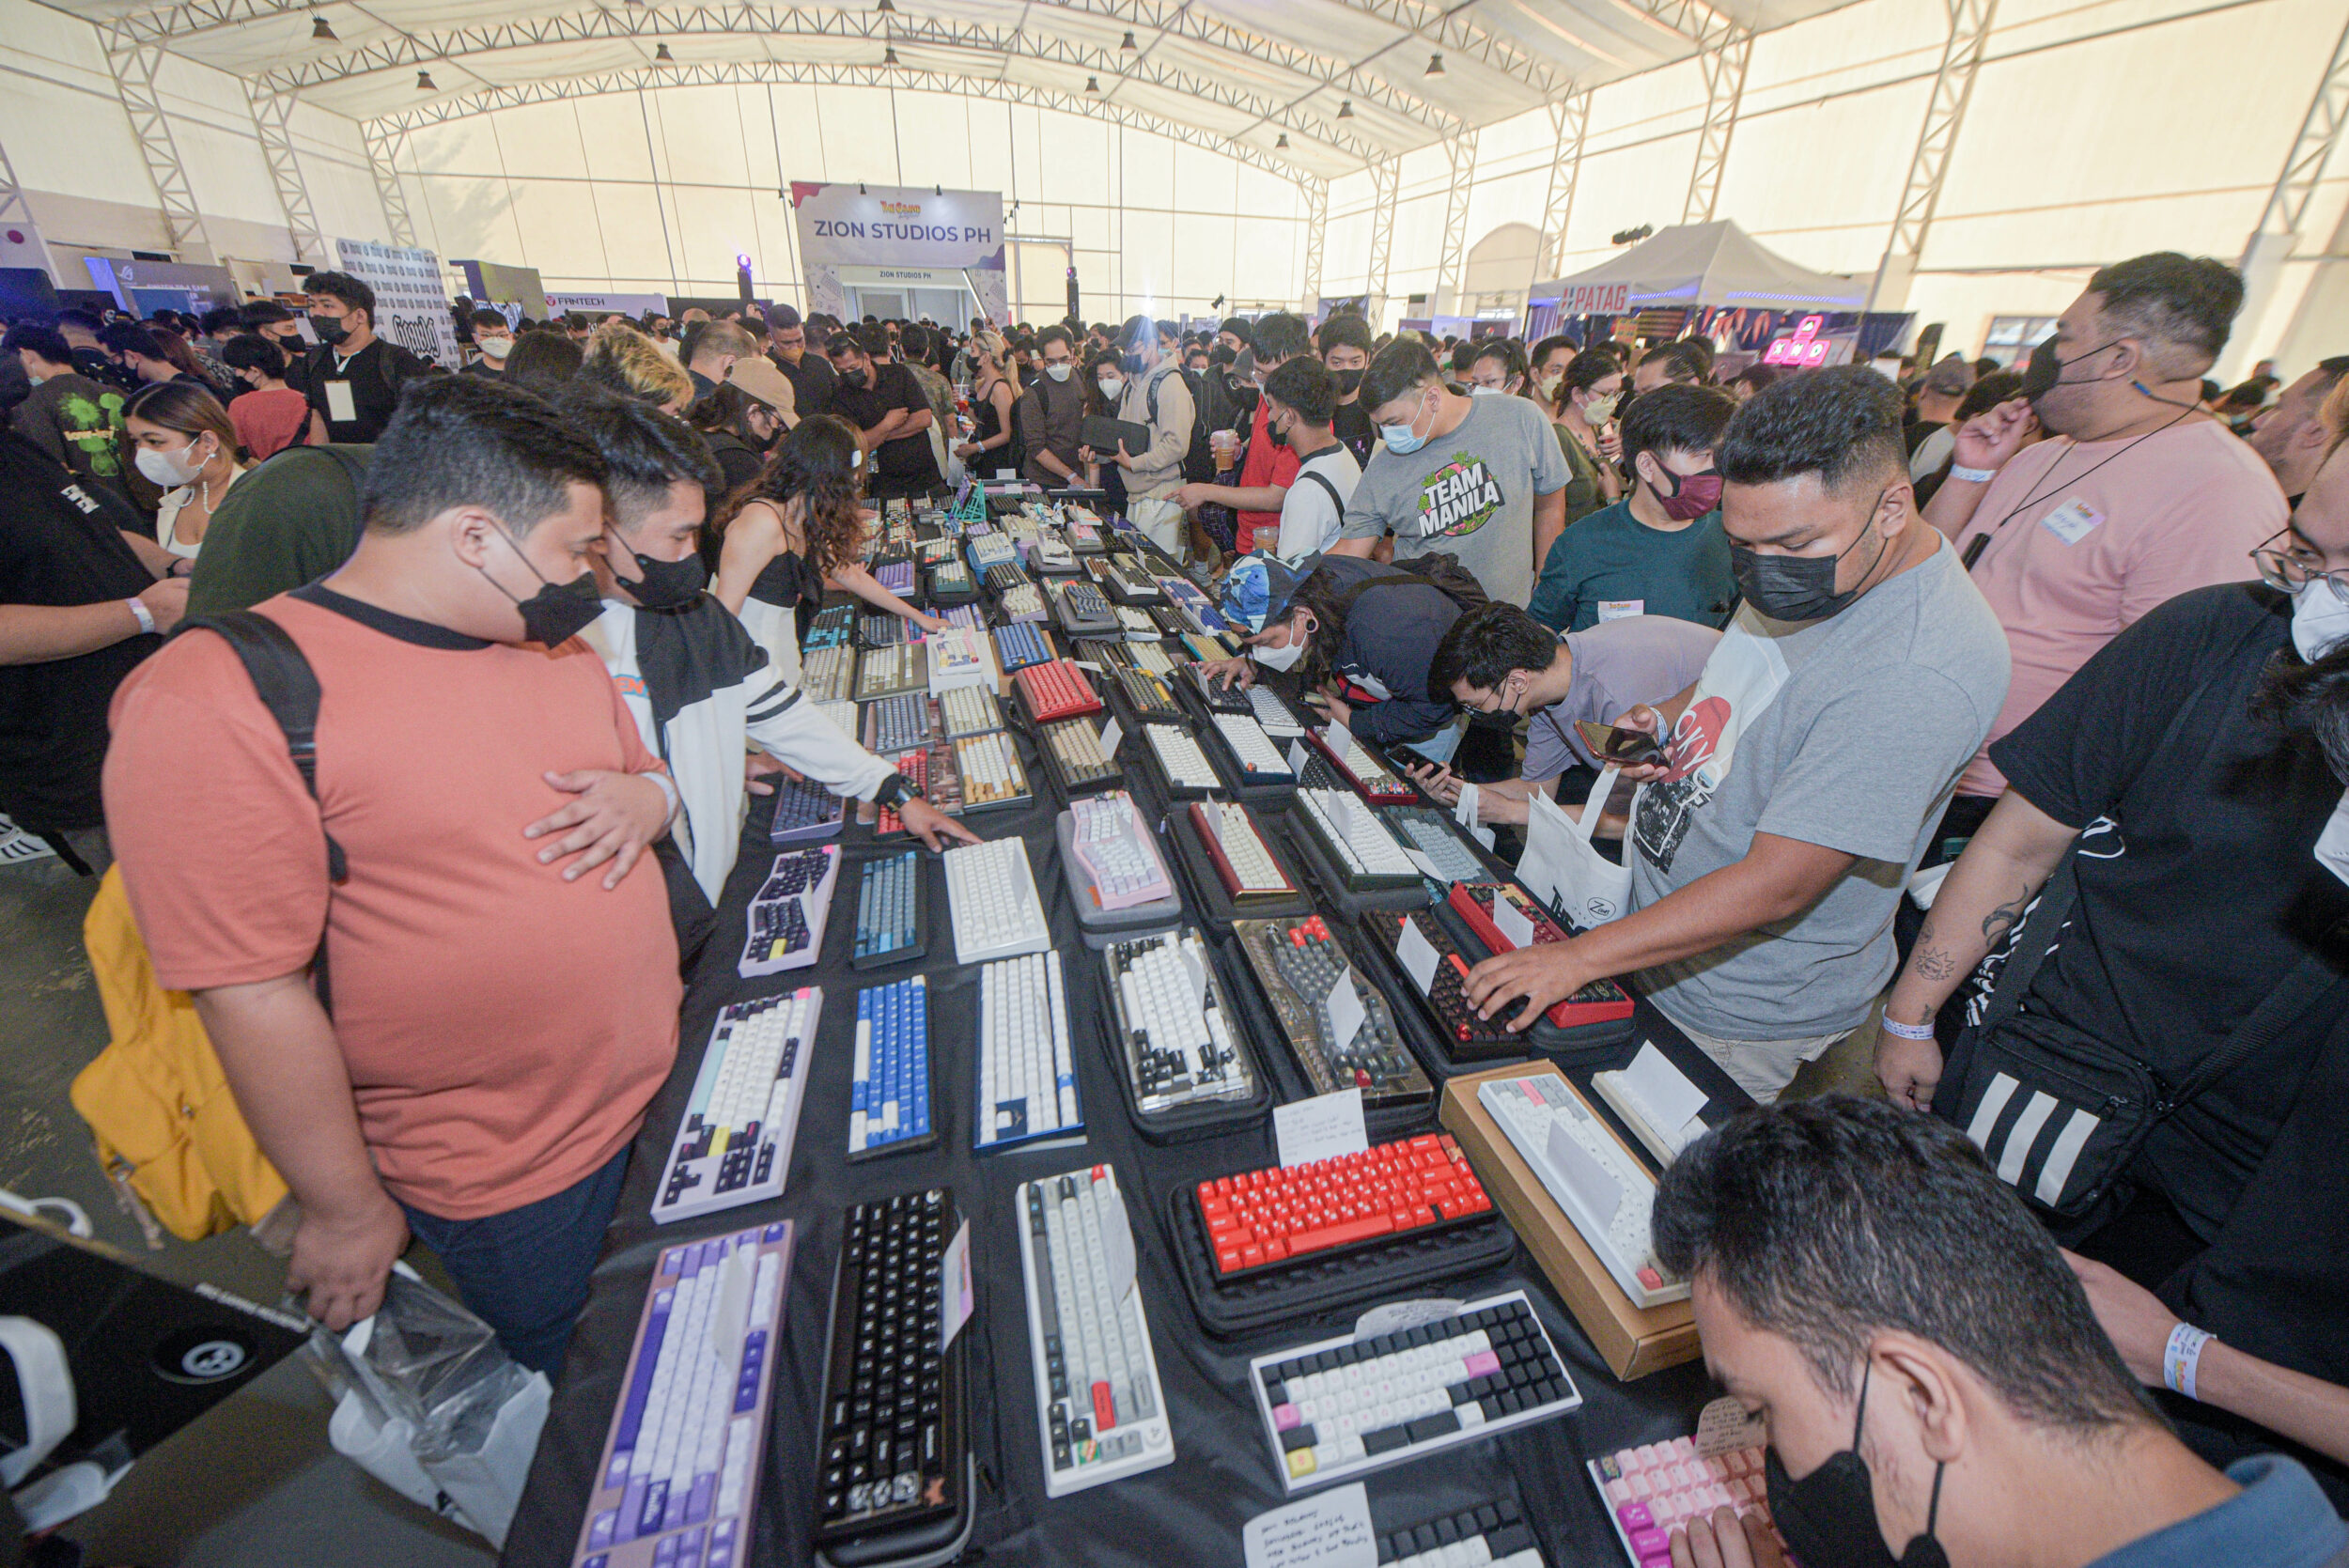 The Grand Lason 2 is Set to Do It Again this Weekend: The Biggest Keyboard Meetup in the World -